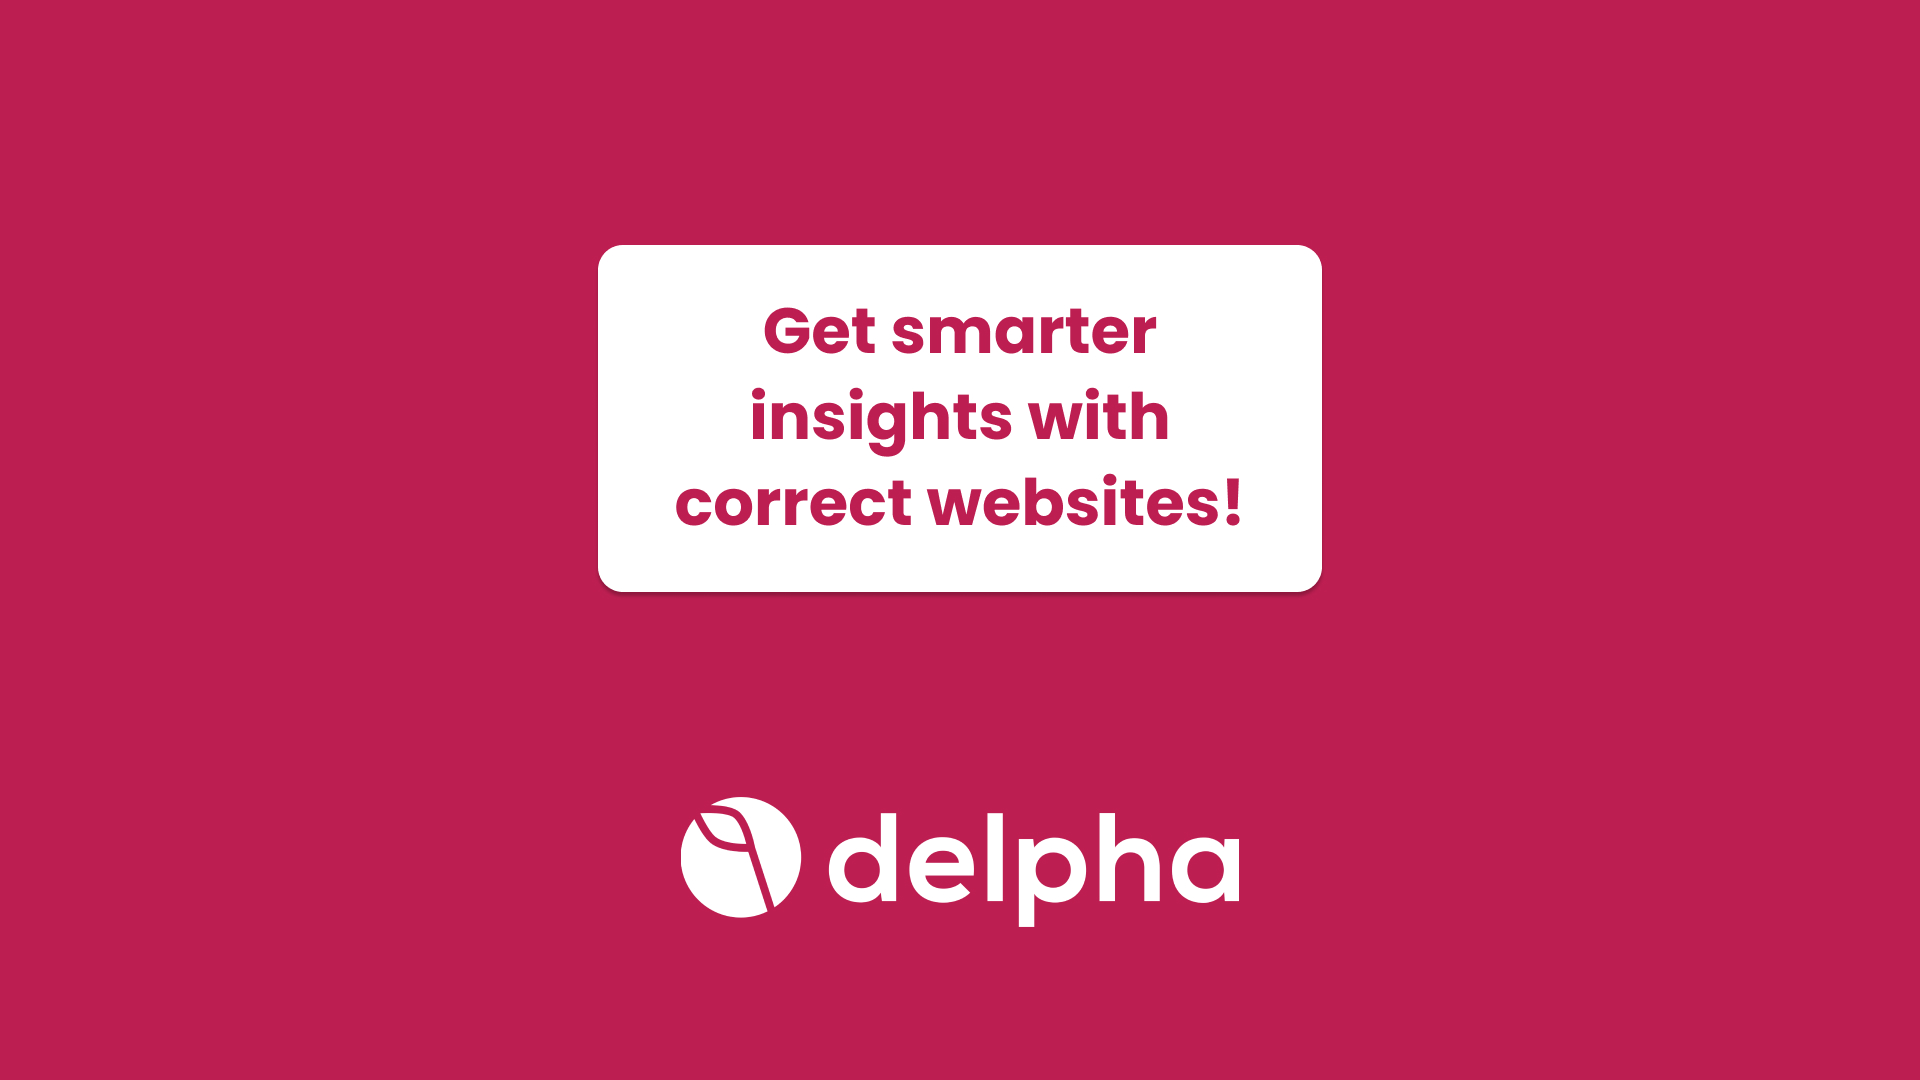 End users can download this Delpha conversation to ensure all team members have access to correct and up-to-date websites.